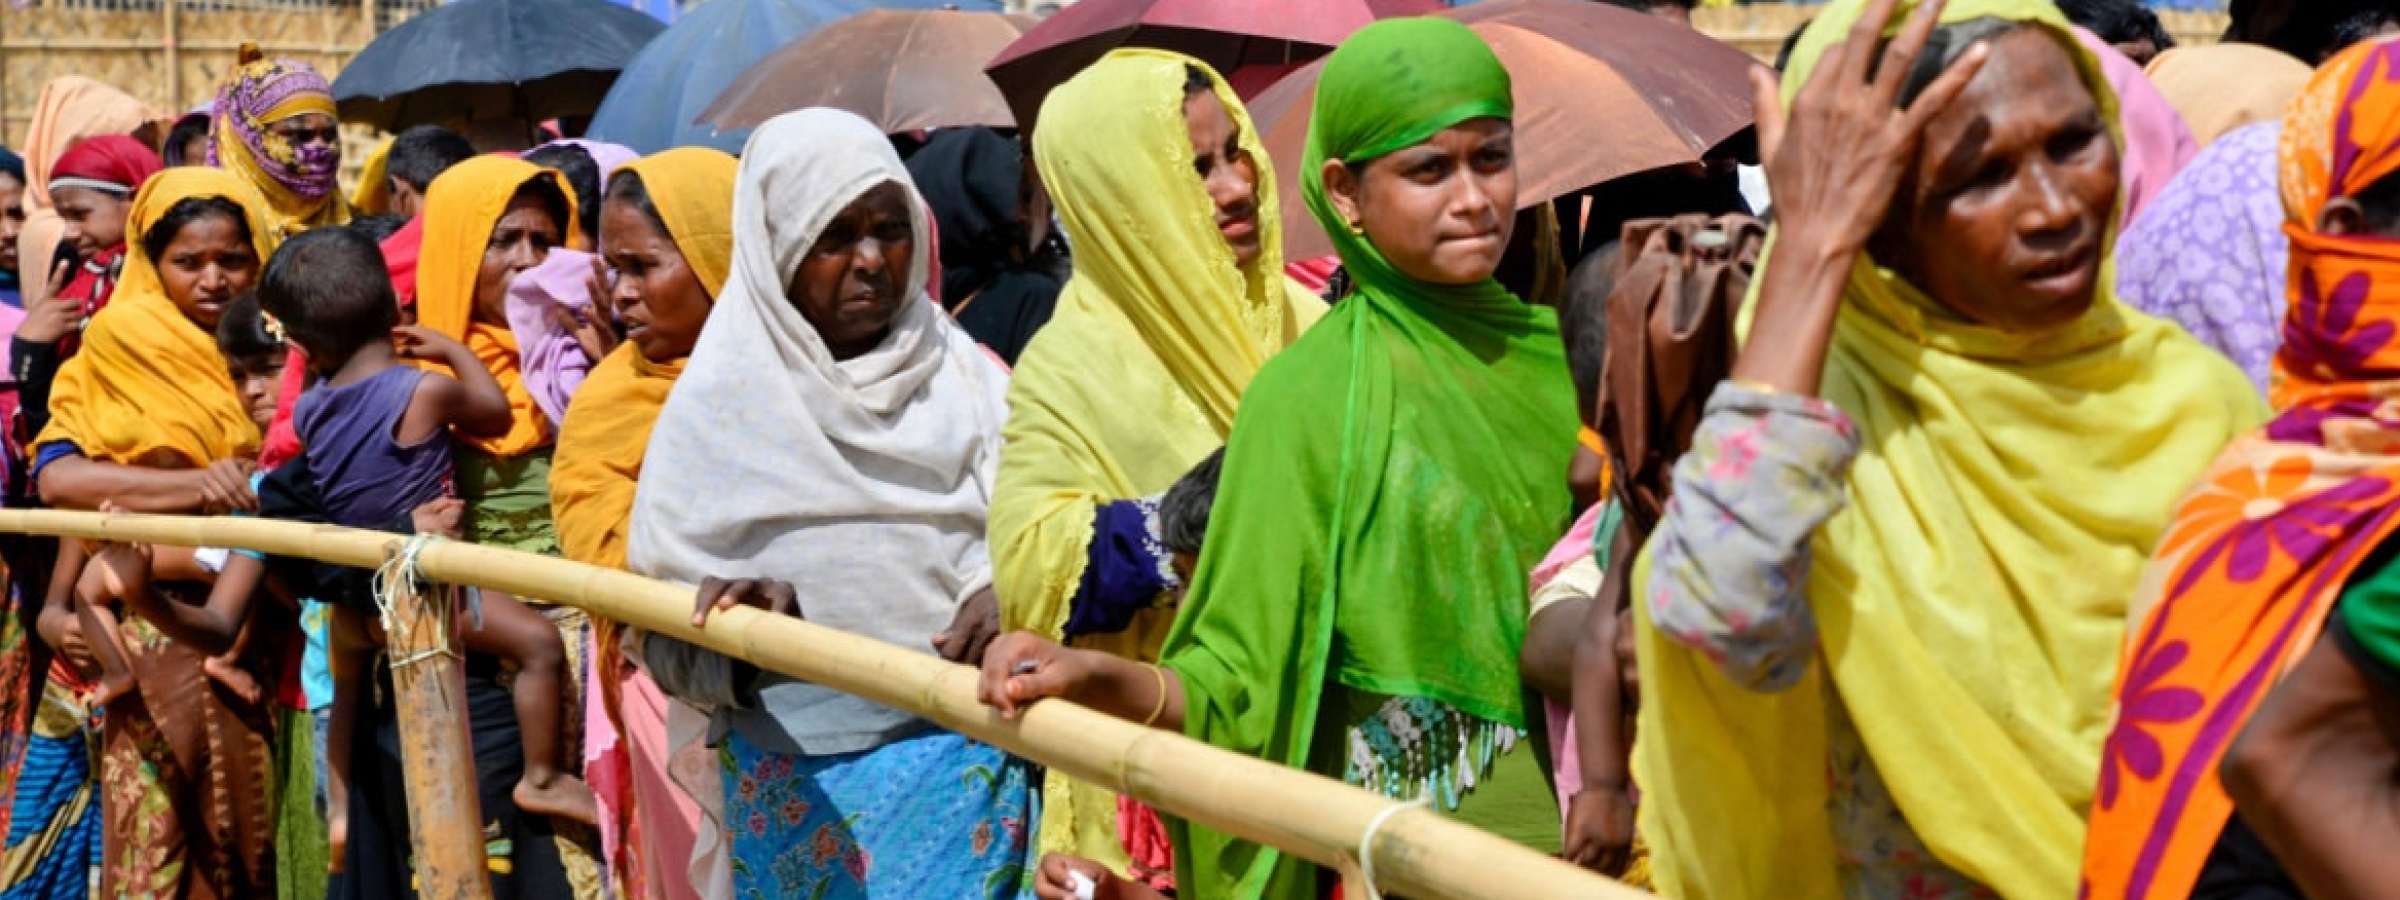 Rohingya refugee women wait to collect relief aid at the palongkhali makeshift Camp in Cox's Bazar, Bangladesh, on October 06, 2017